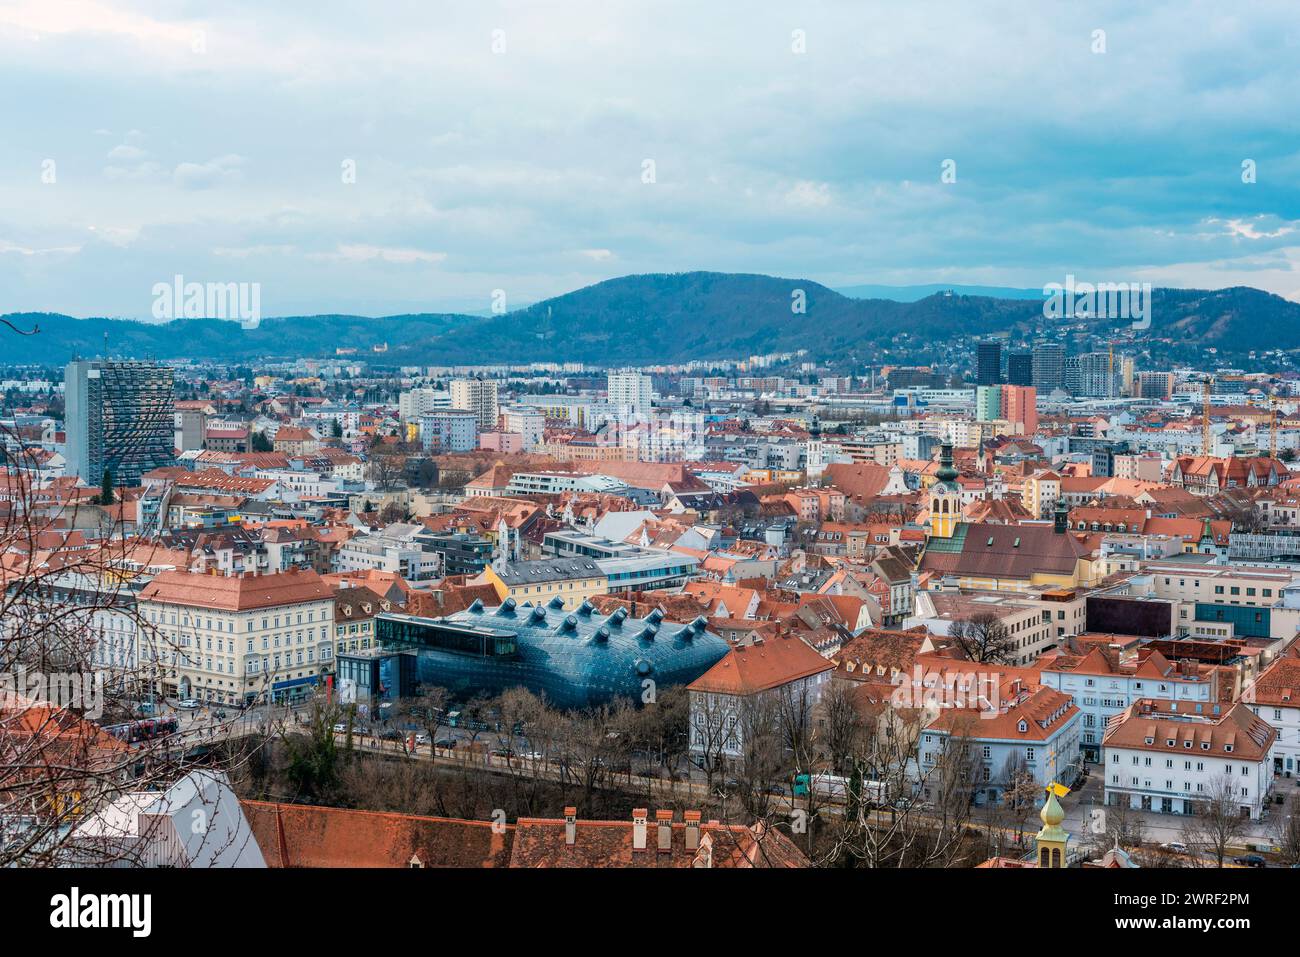 Aerial view of city of Graz at winter, Austria. Stock Photo